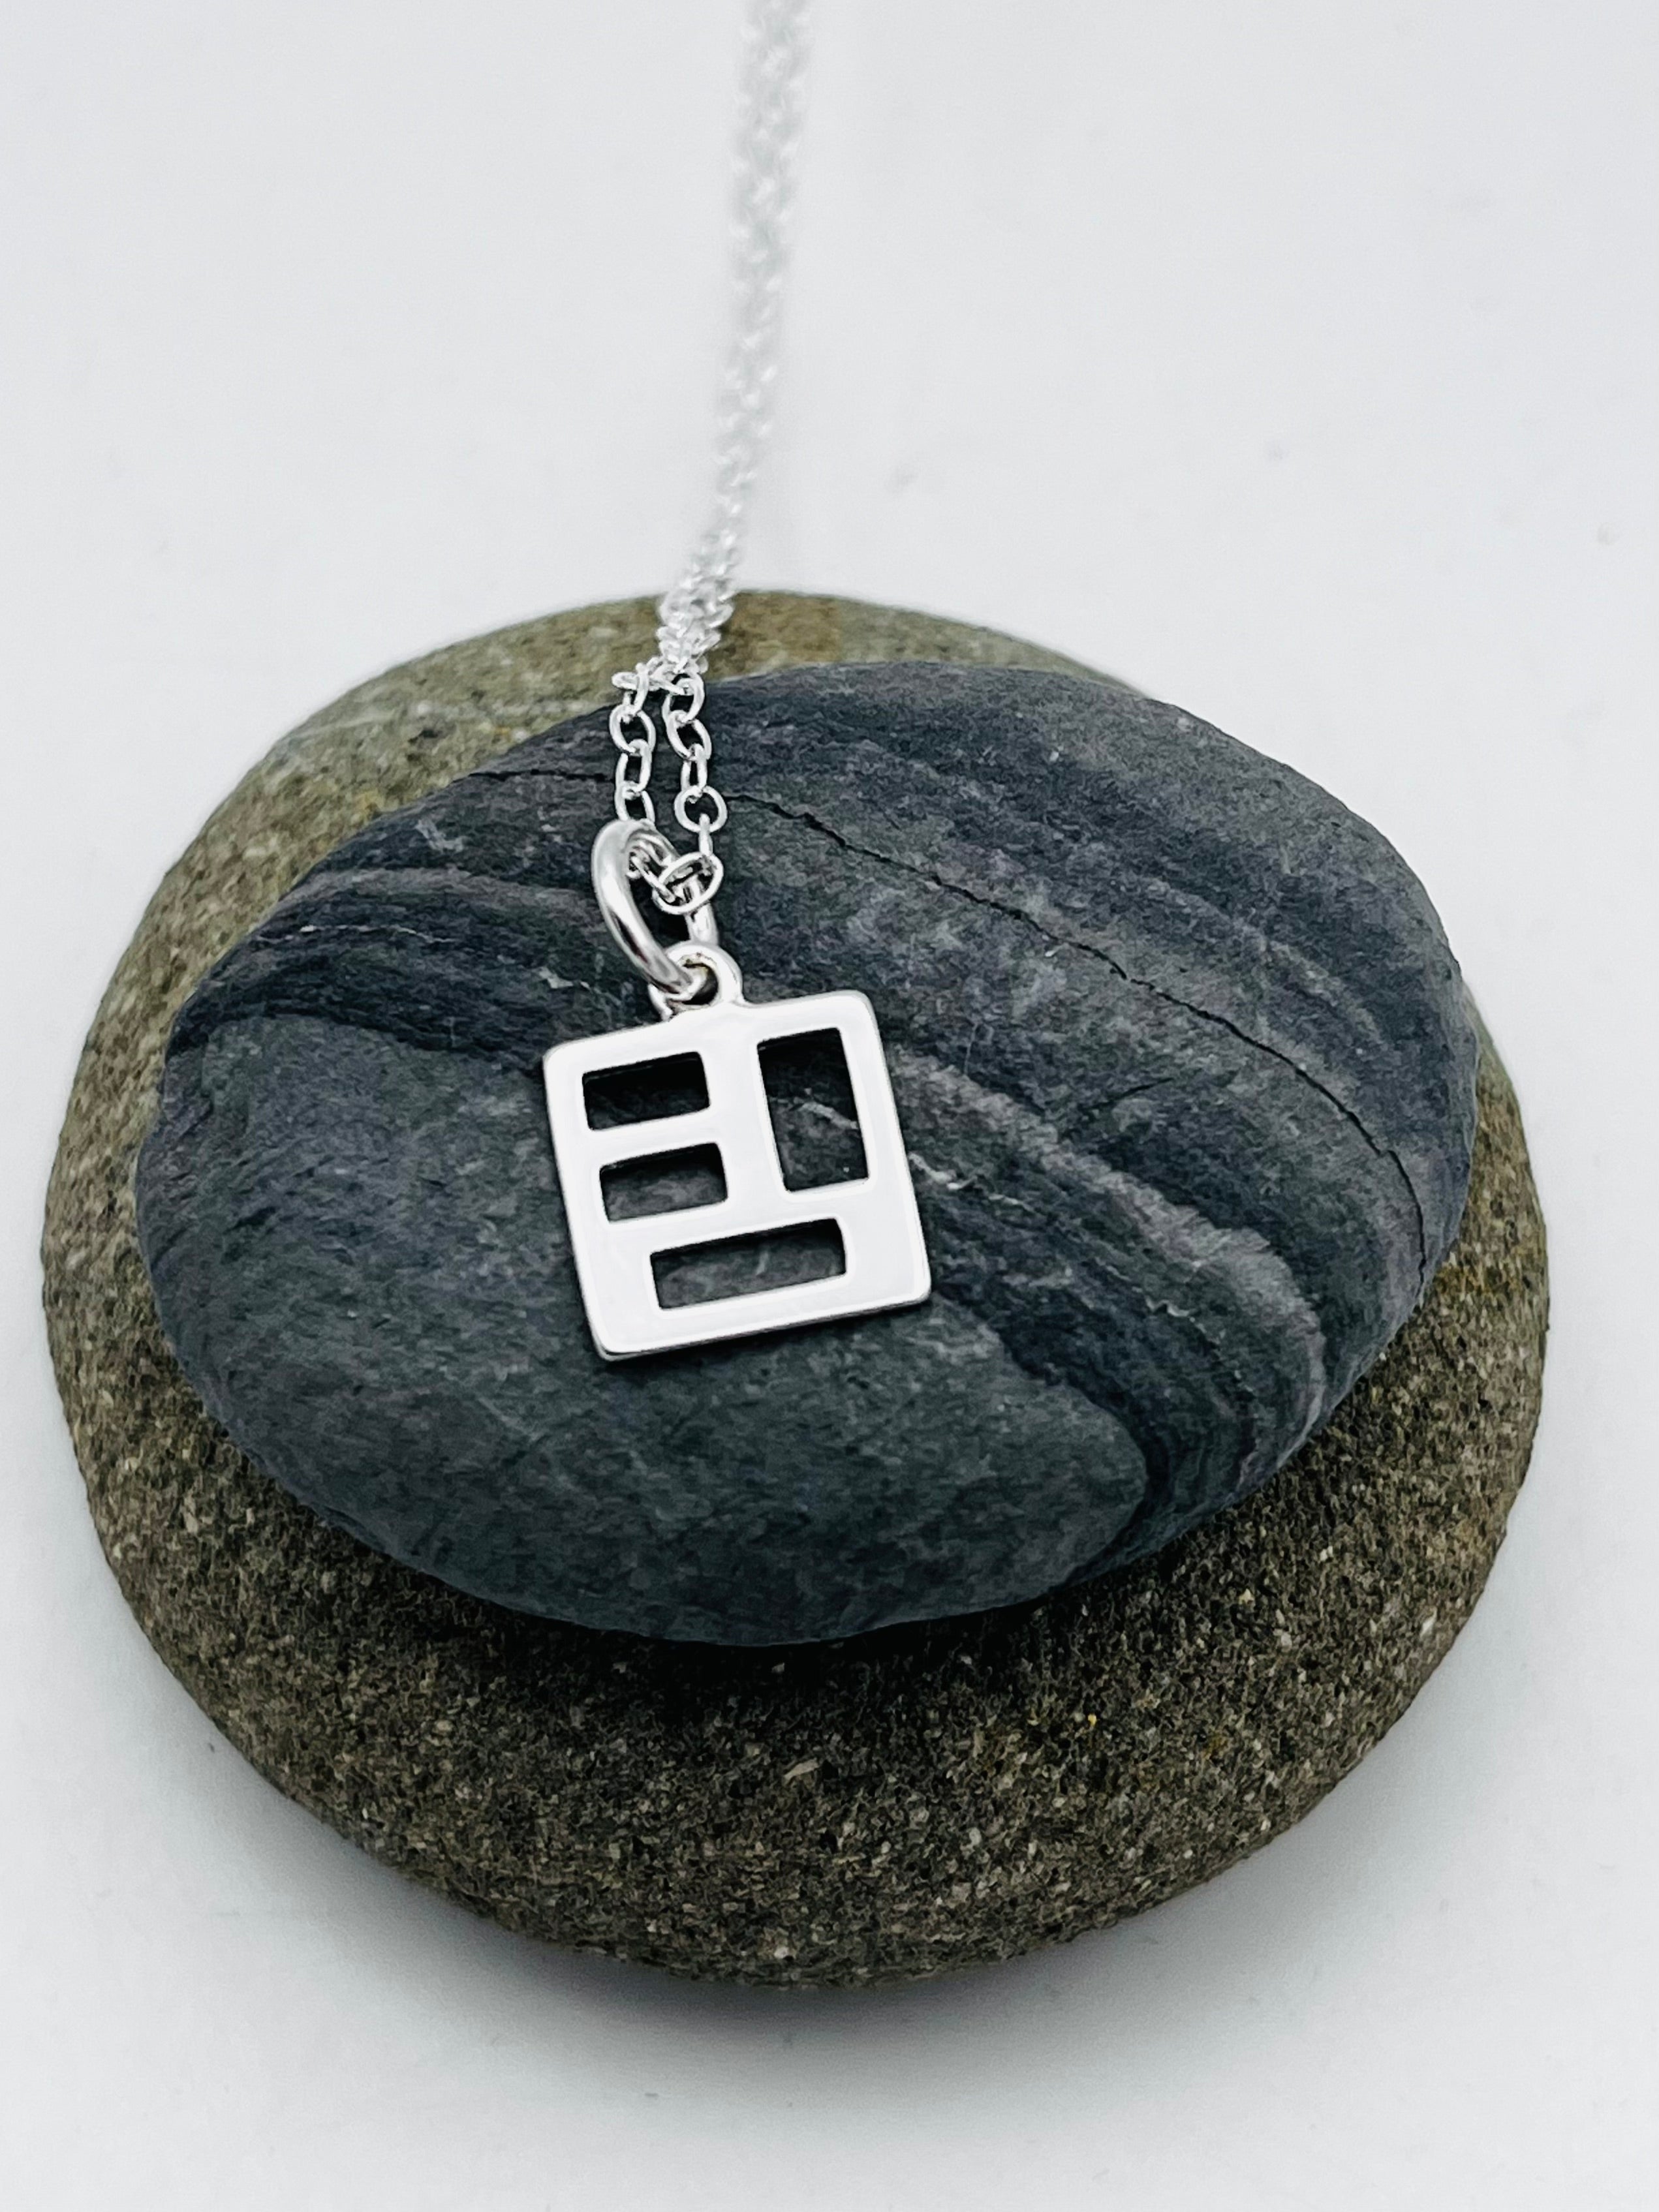 Sterling Silver 10mm polished geometric square pendant on 16" trace chain